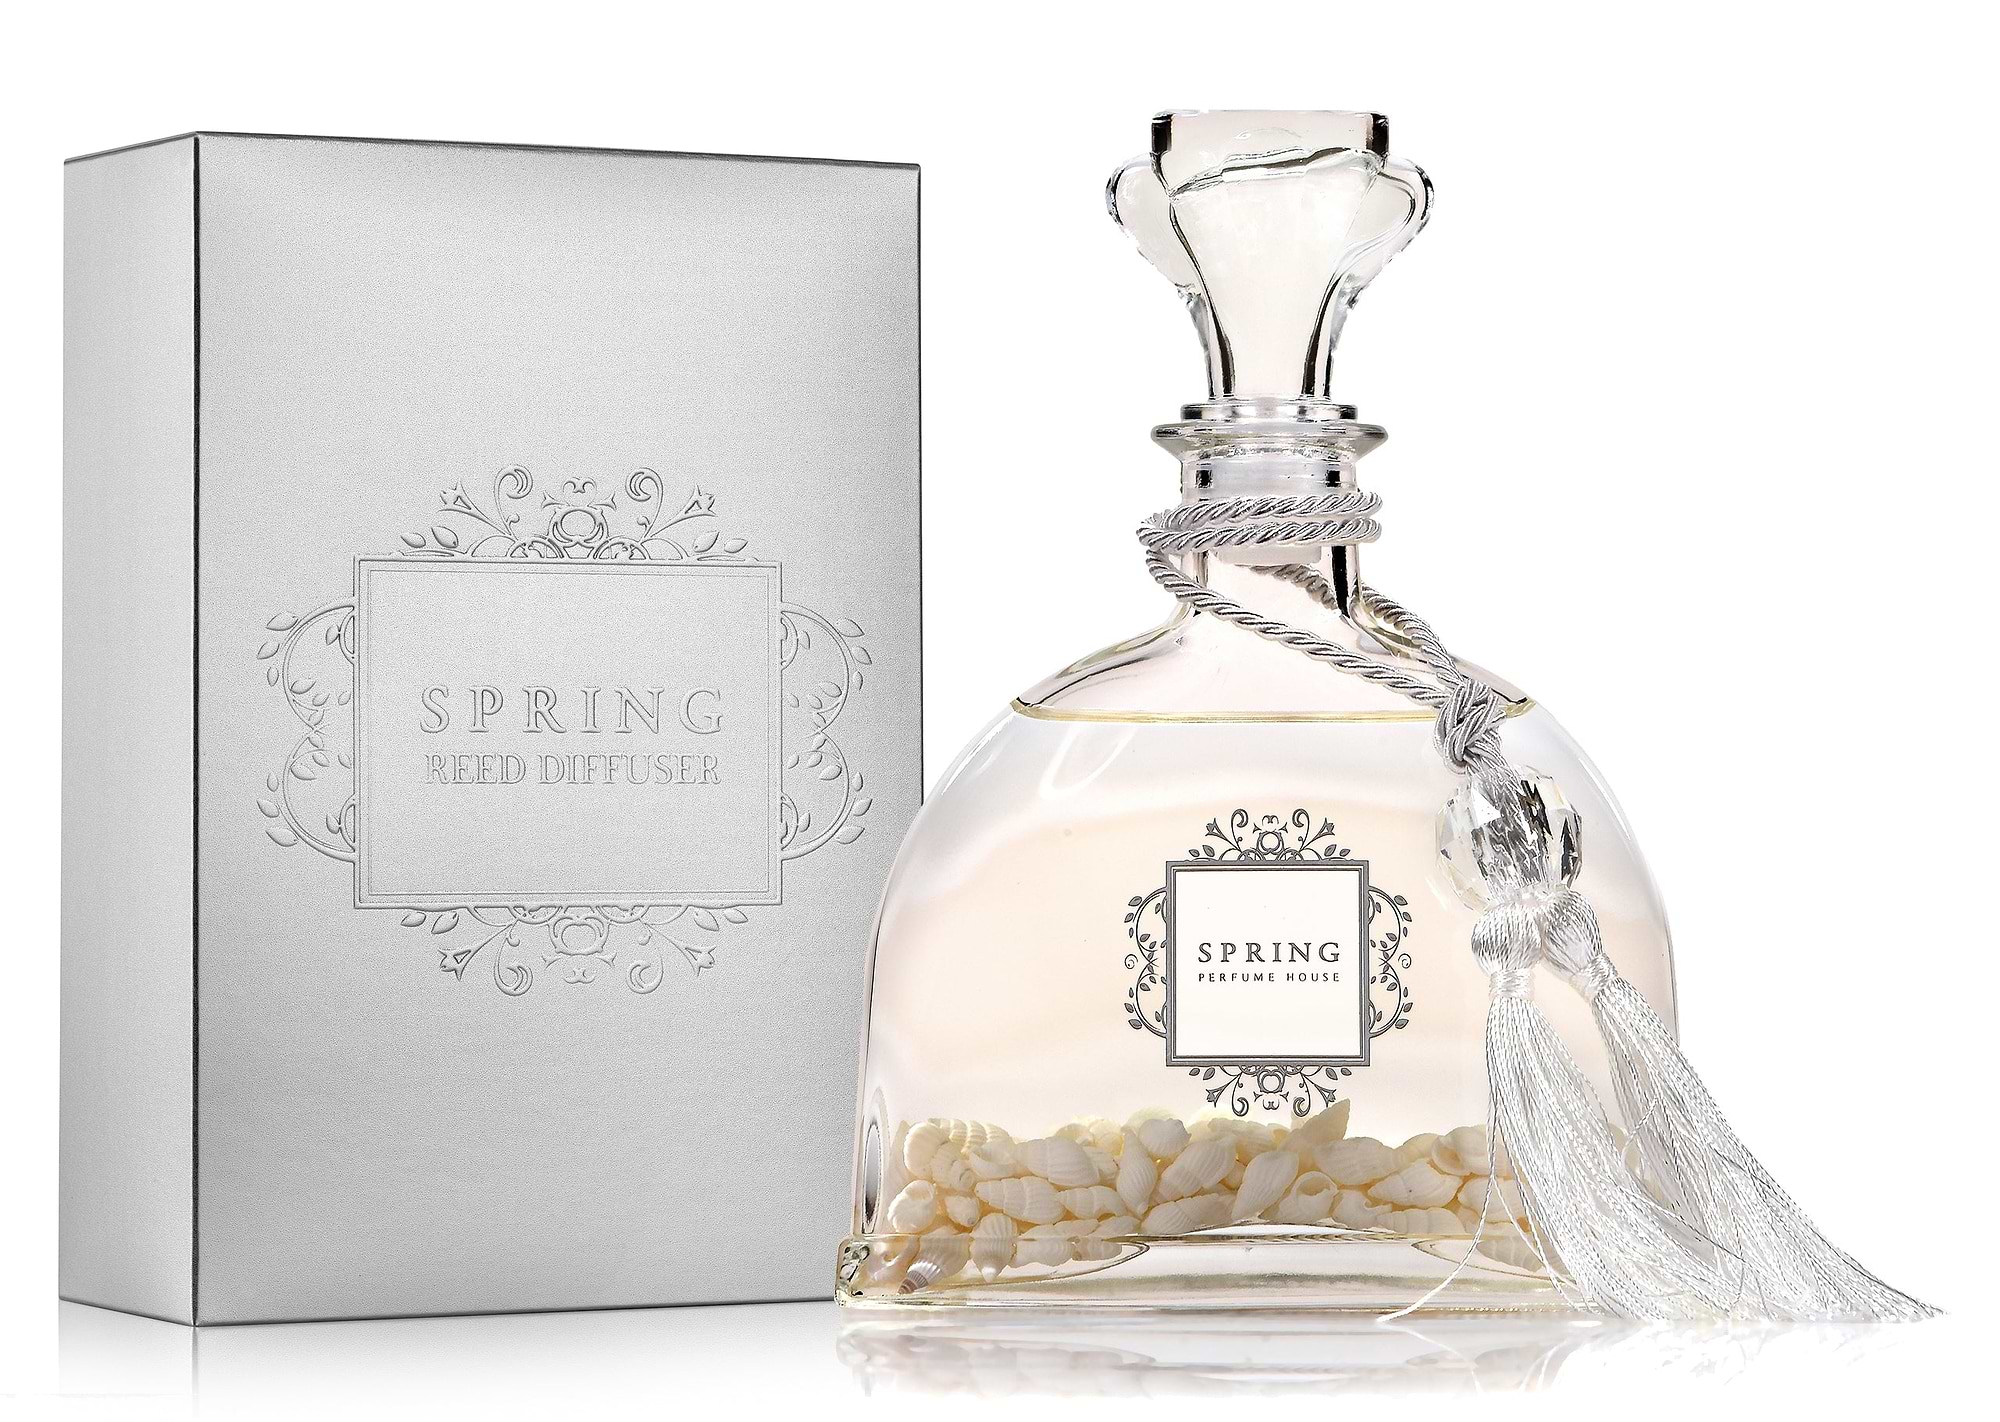 SPRING Fragrance Reed Diffuser Set |10.14oz (300ml) Ocean Design |Fragrance Made in France |Home Décor |Scented Aromatic Oil |Room Air Freshener White Flower | Alcohol + Ethanol free and VOC Compliant